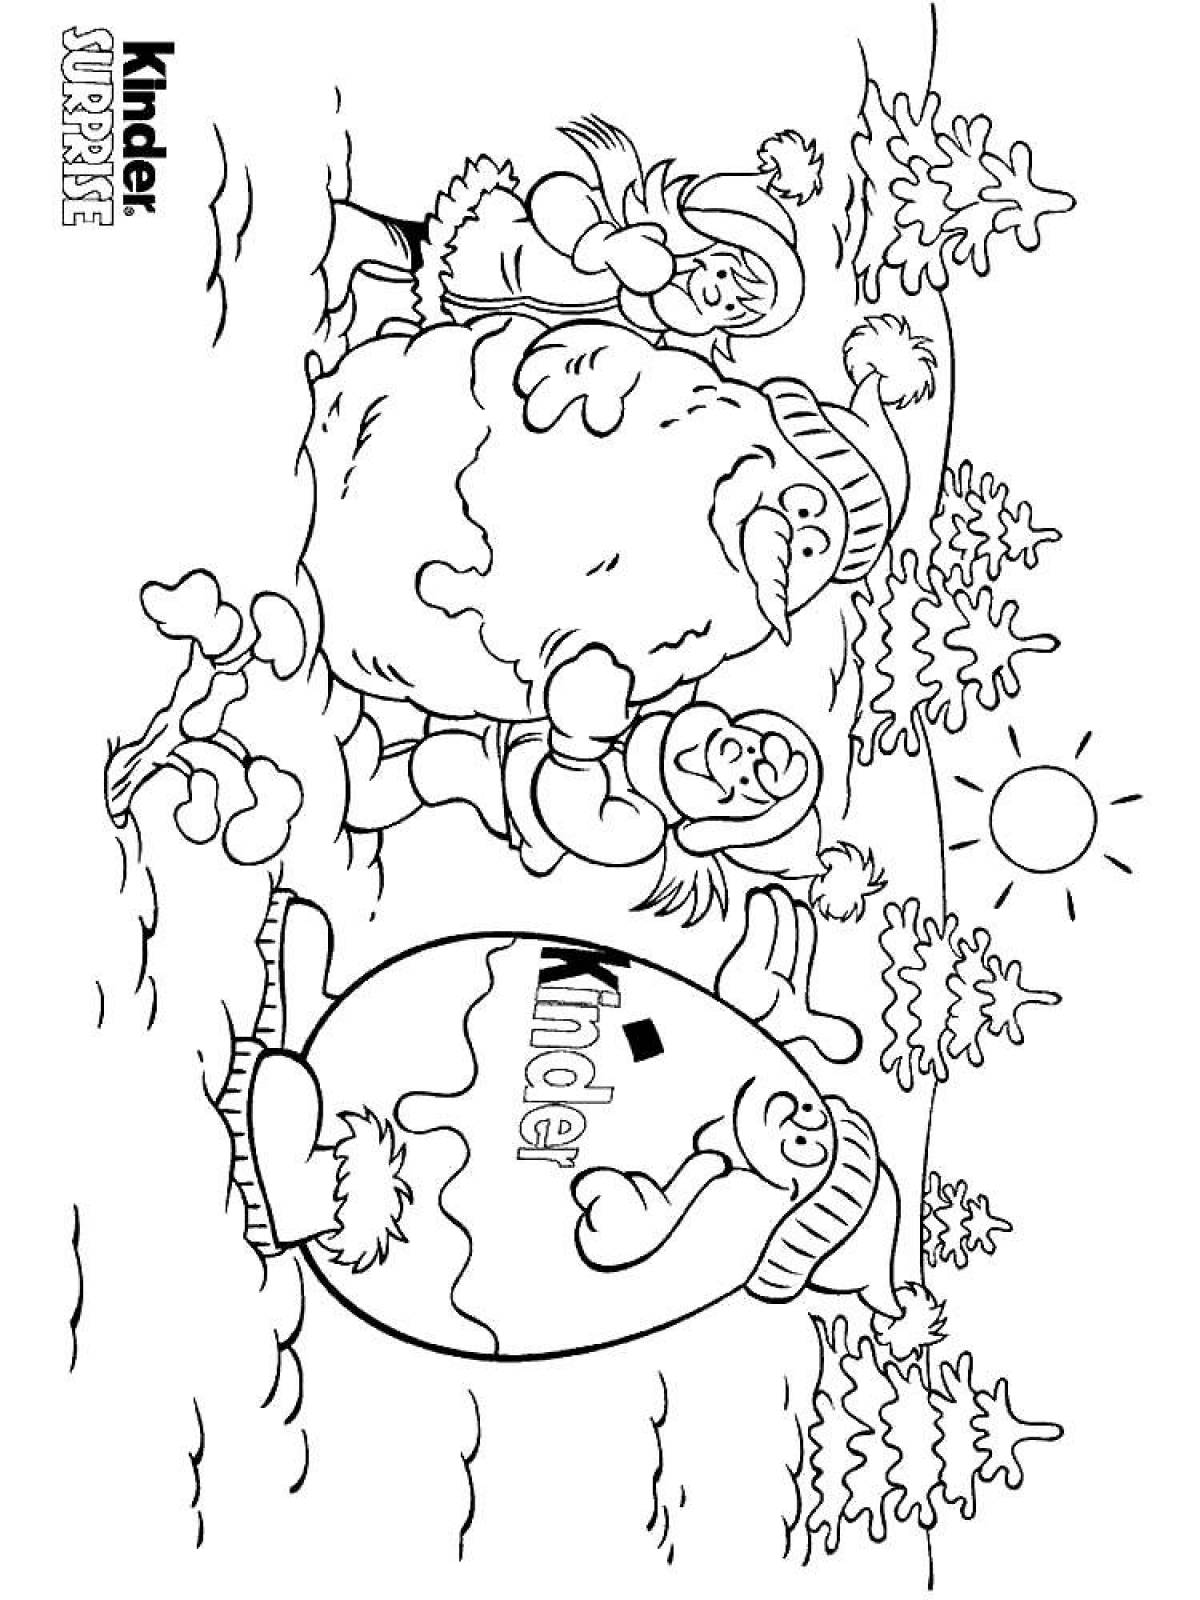 Colorful children's coloring book